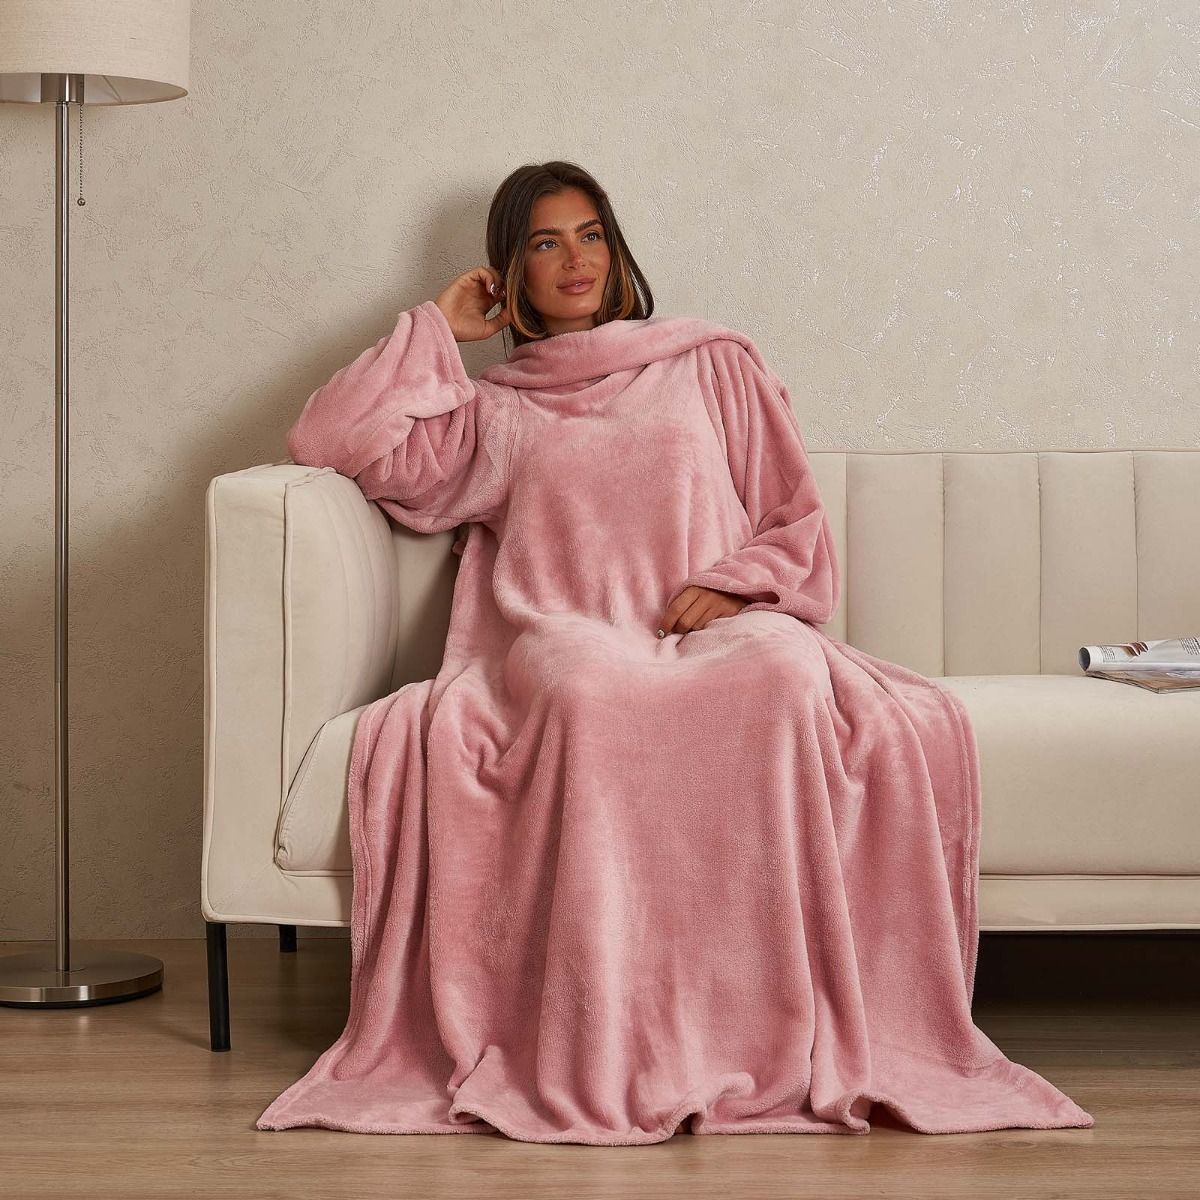 OHS Ultra Soft Wearable Blanket with Sleeves - Blush